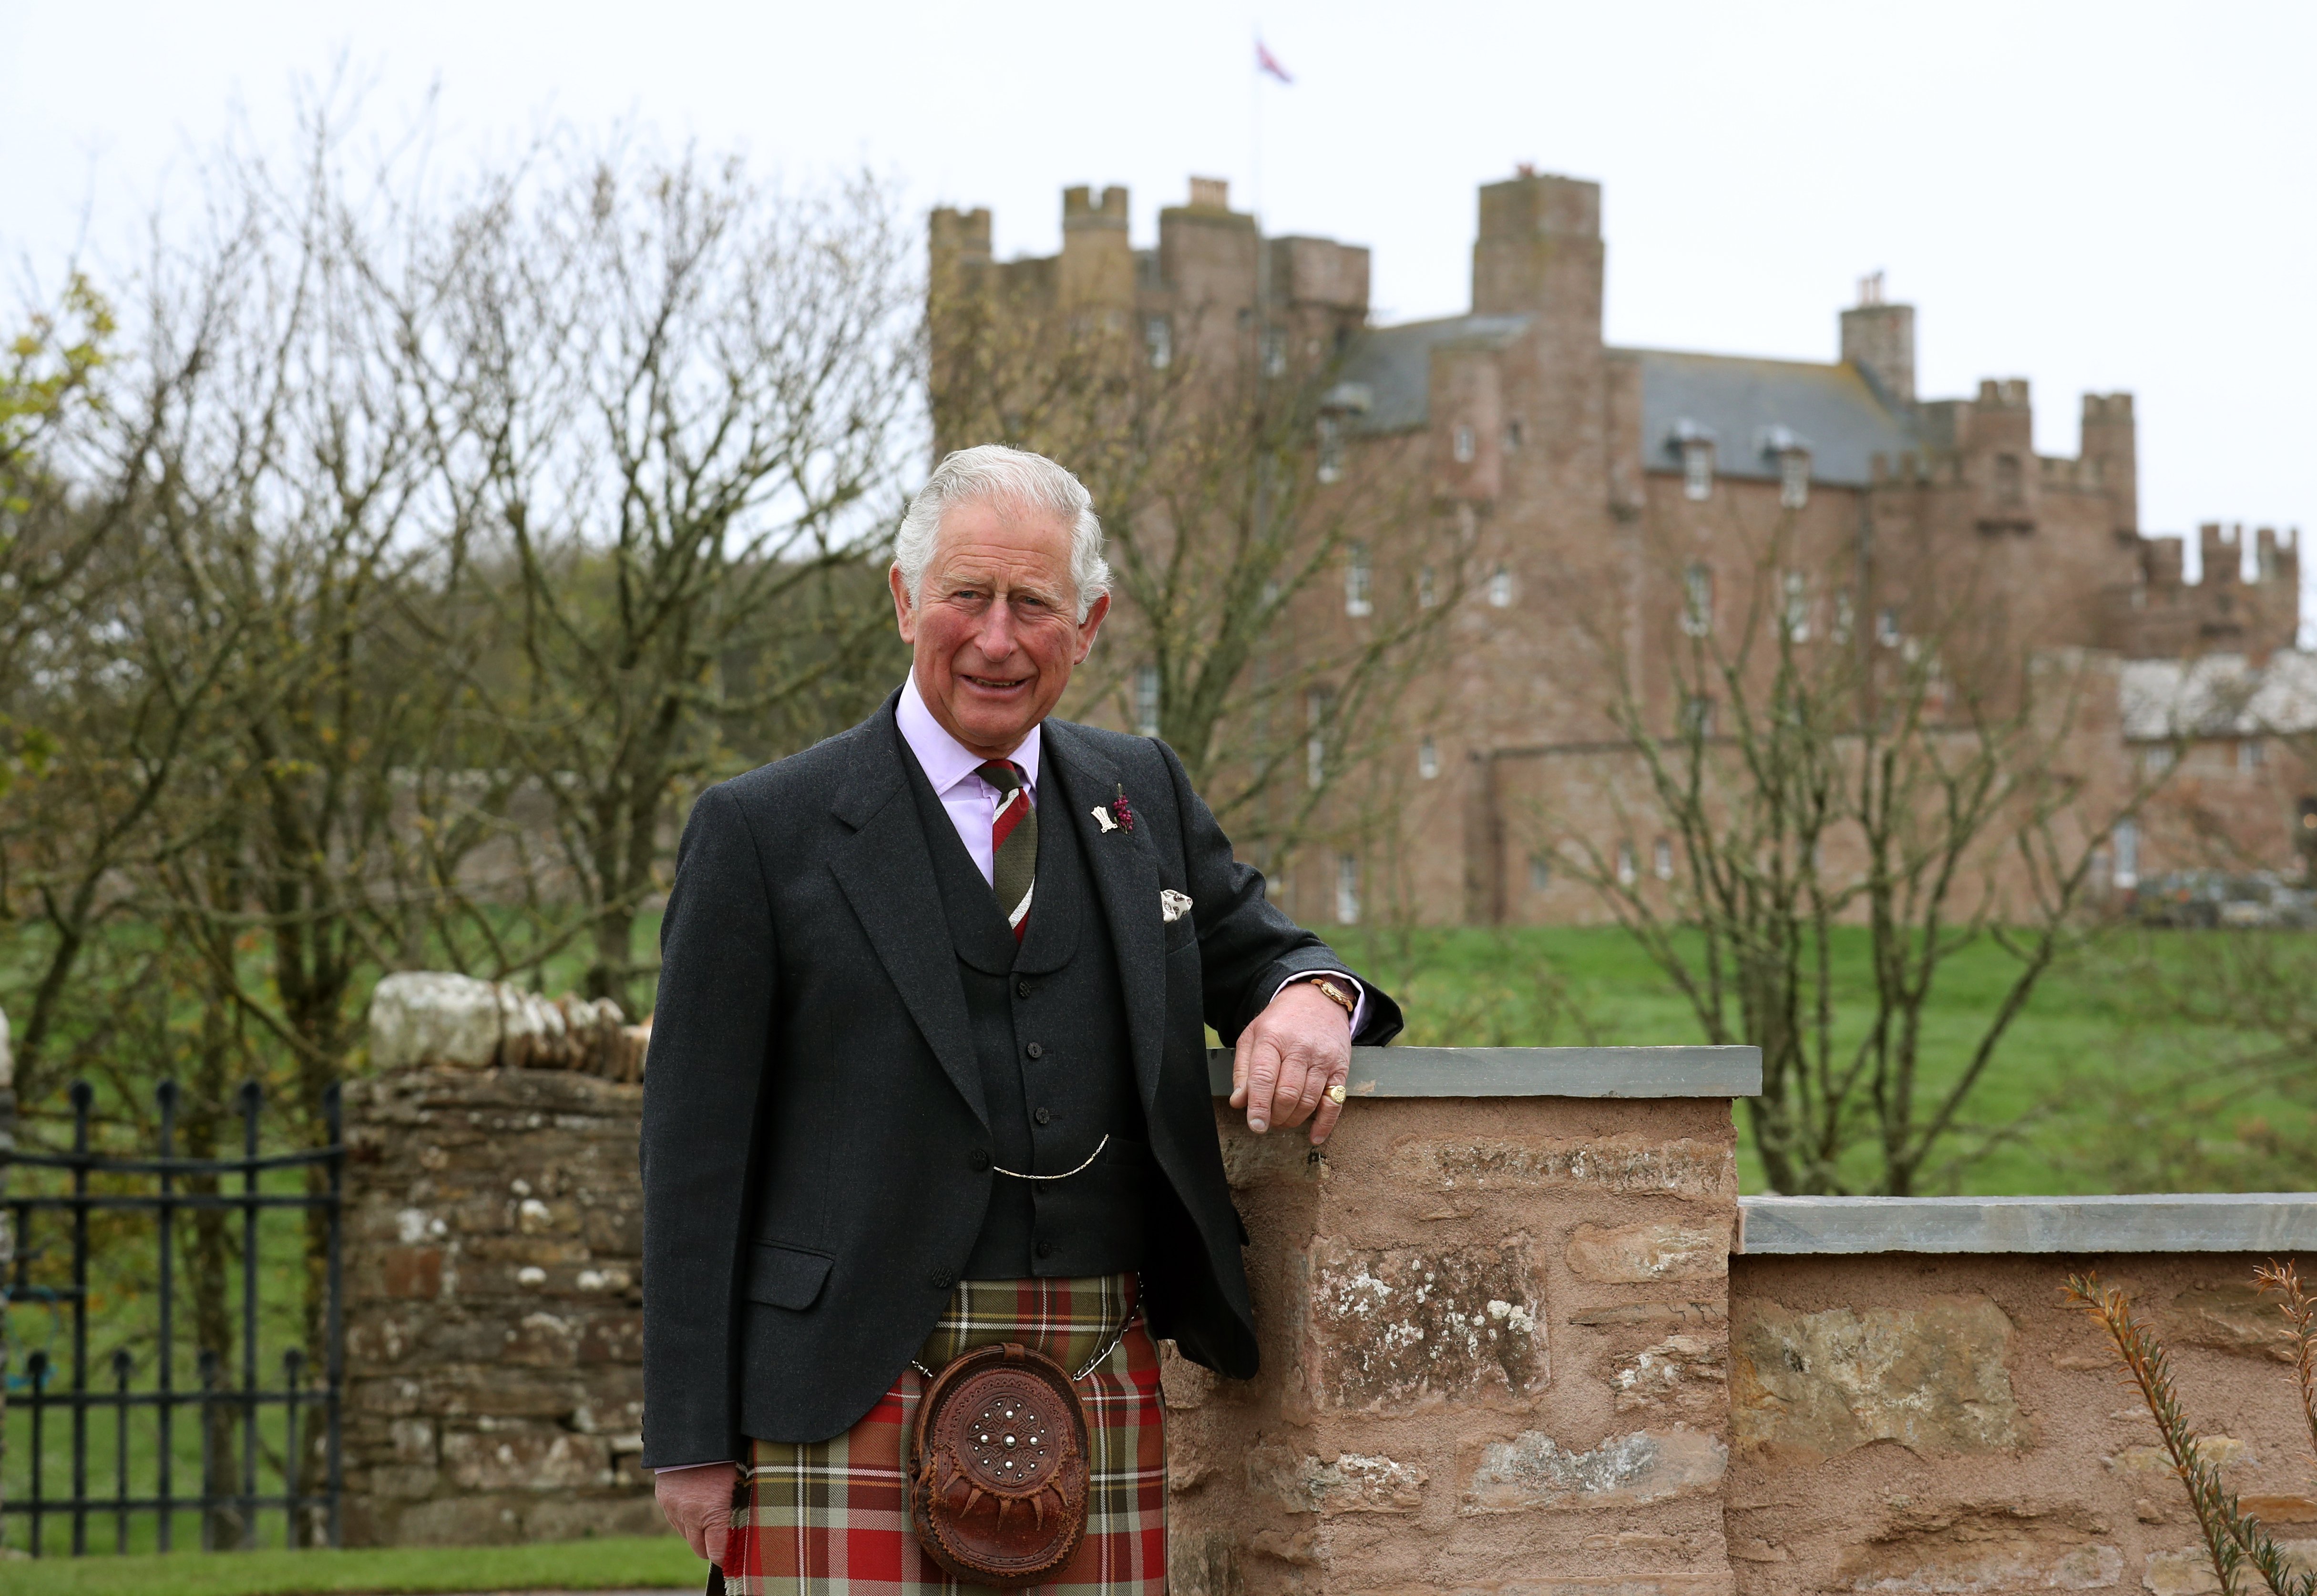 Prince Charles poses for a photograph in front of the Castle of Mey after he officially opened the Granary Accommodation on May 1, 2019. | Source: Getty Images